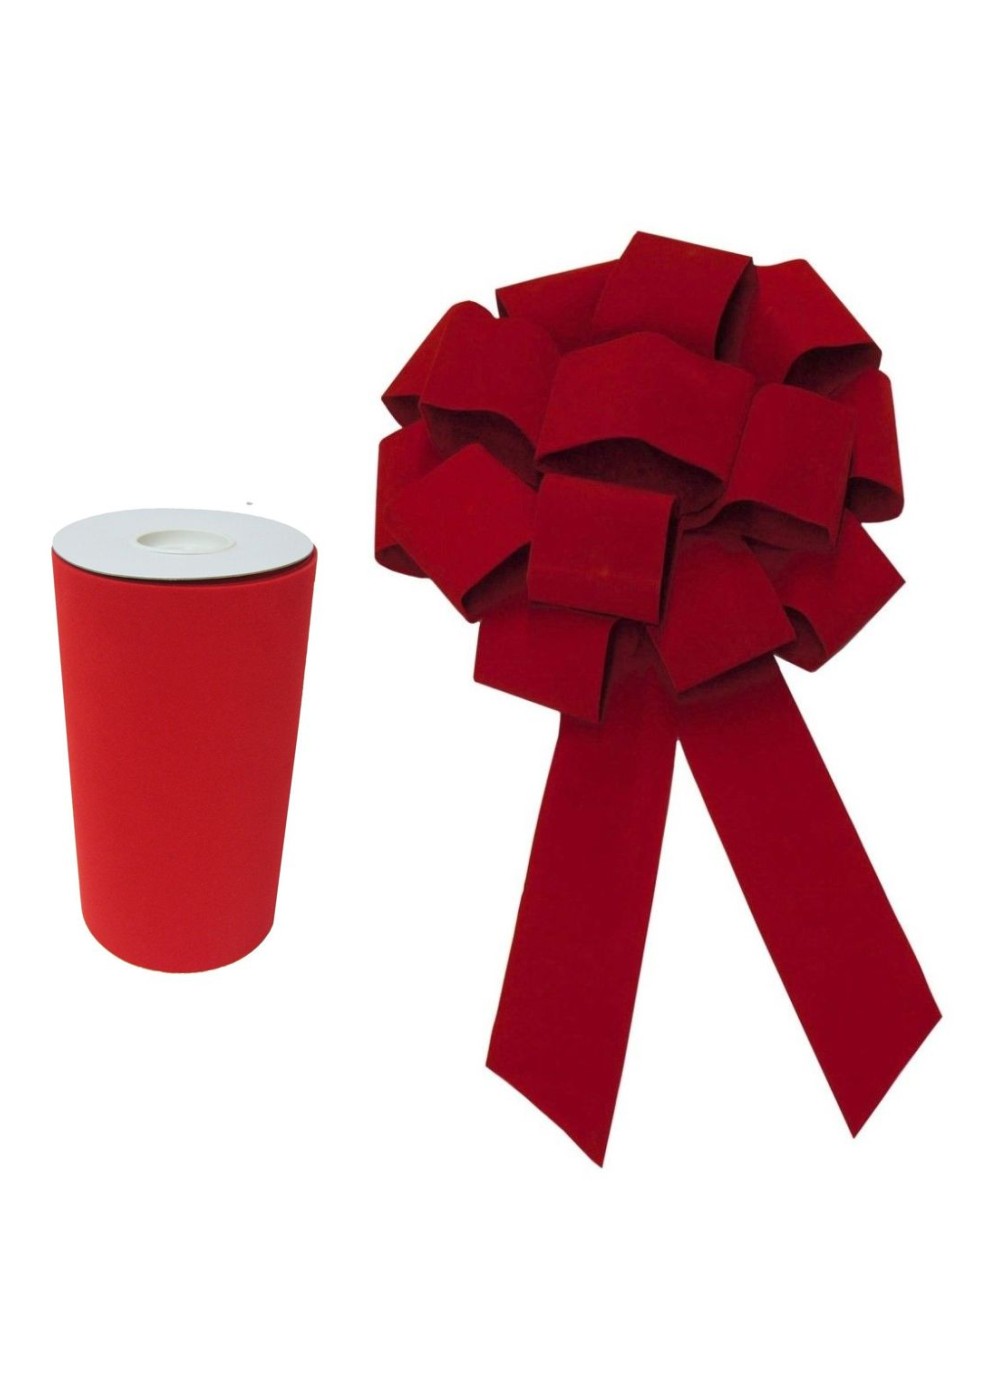 7.5 X 25 Feet Red Ribbon Roll With 24 Or 43 Inch Red Bow